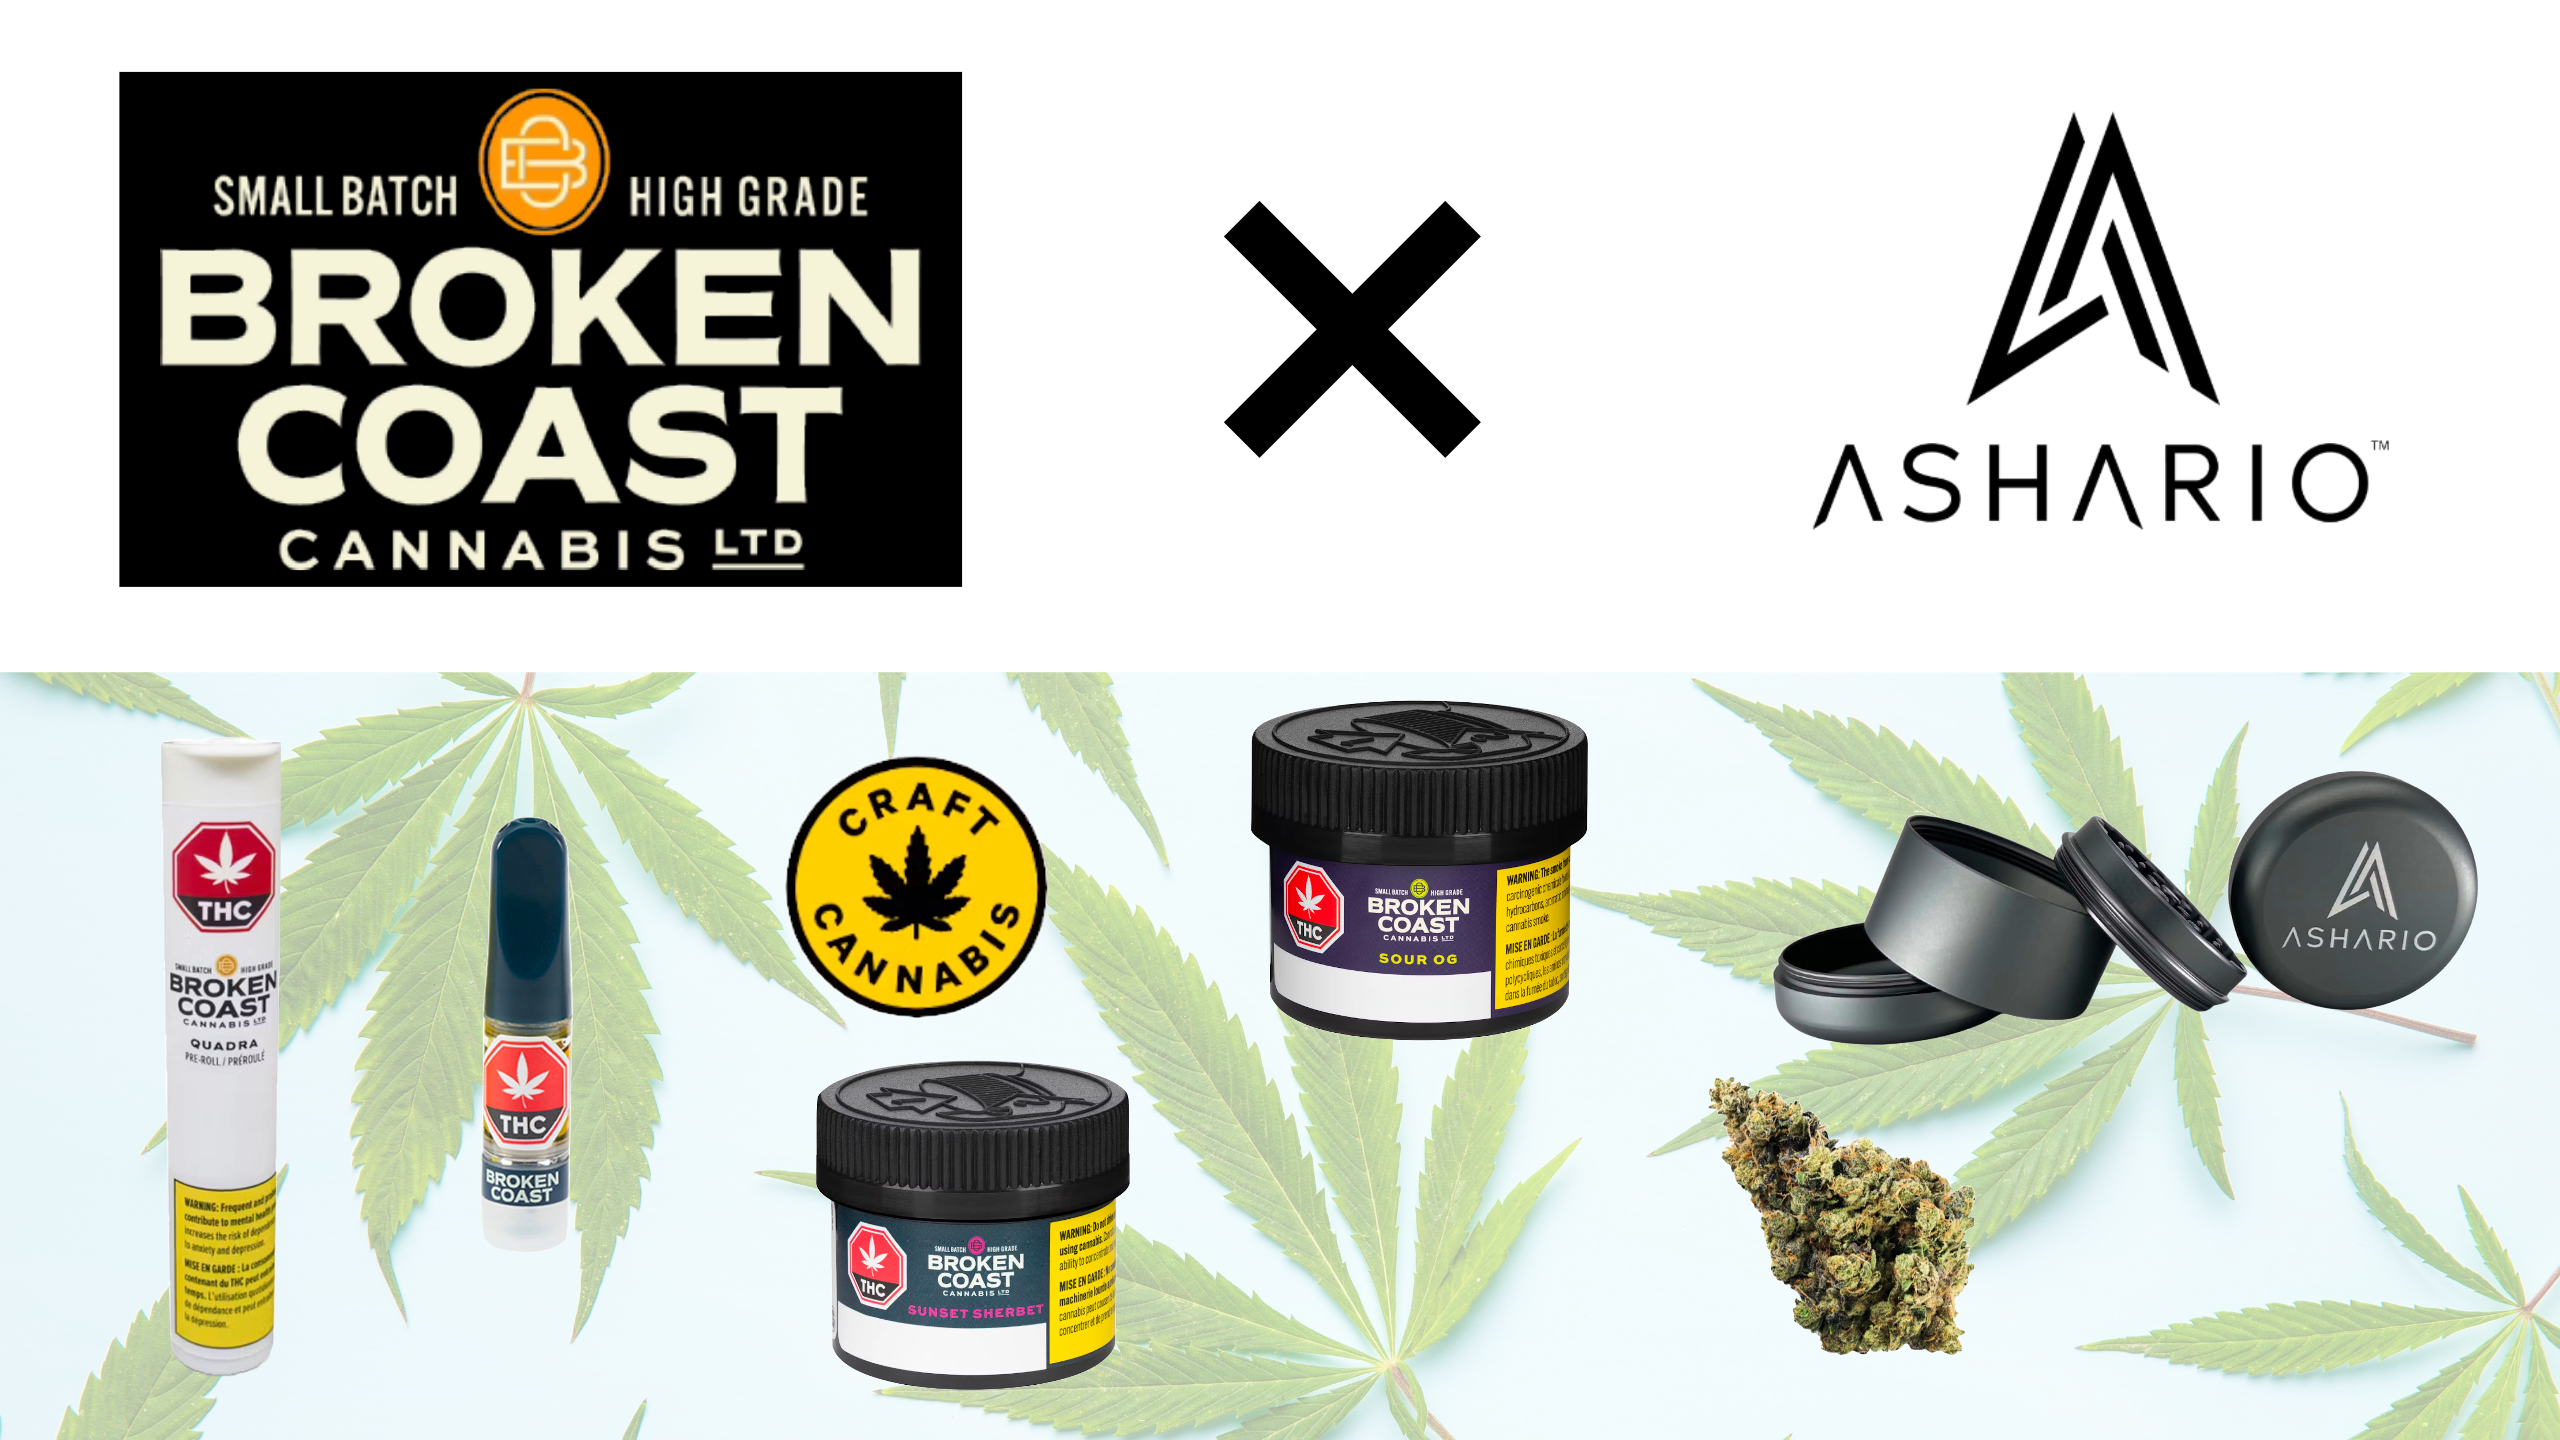 Discover the pinnacle of cannabis quality with Broken Coast, the top choice for flower and pre-rolls in Canada.